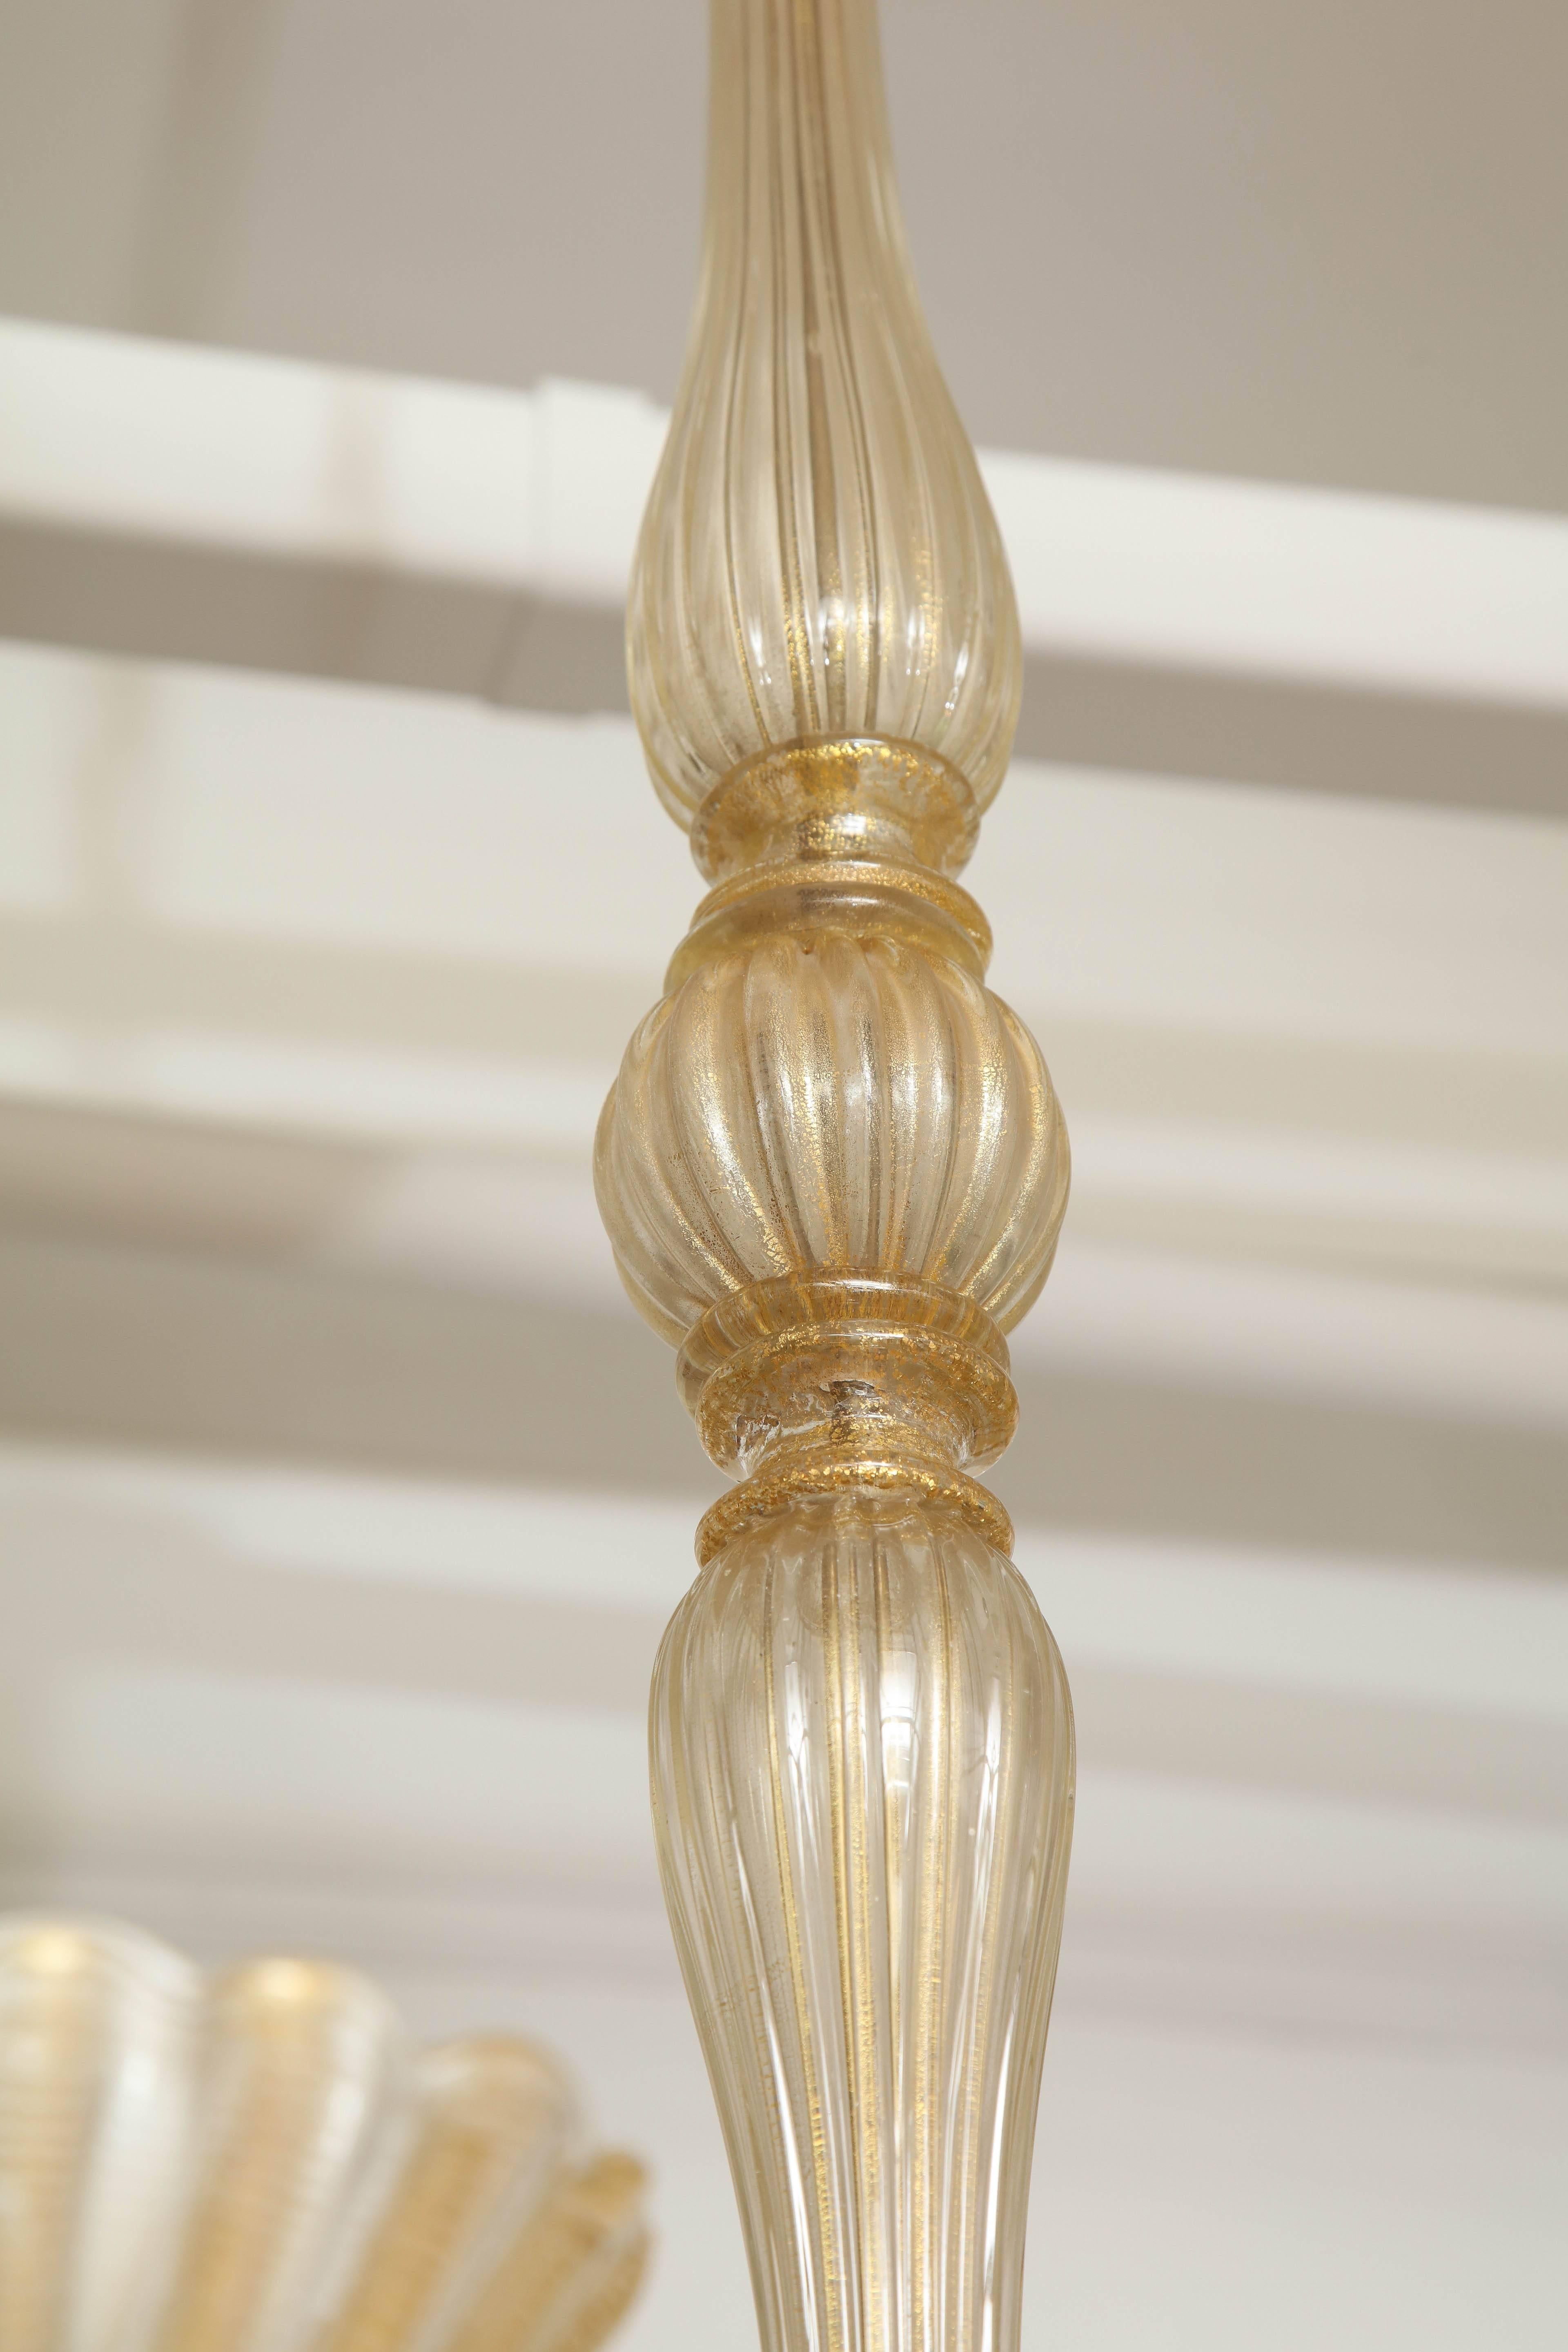 Hand-Crafted Barovier & Toso Chandelier Made in Venice, 1935 For Sale